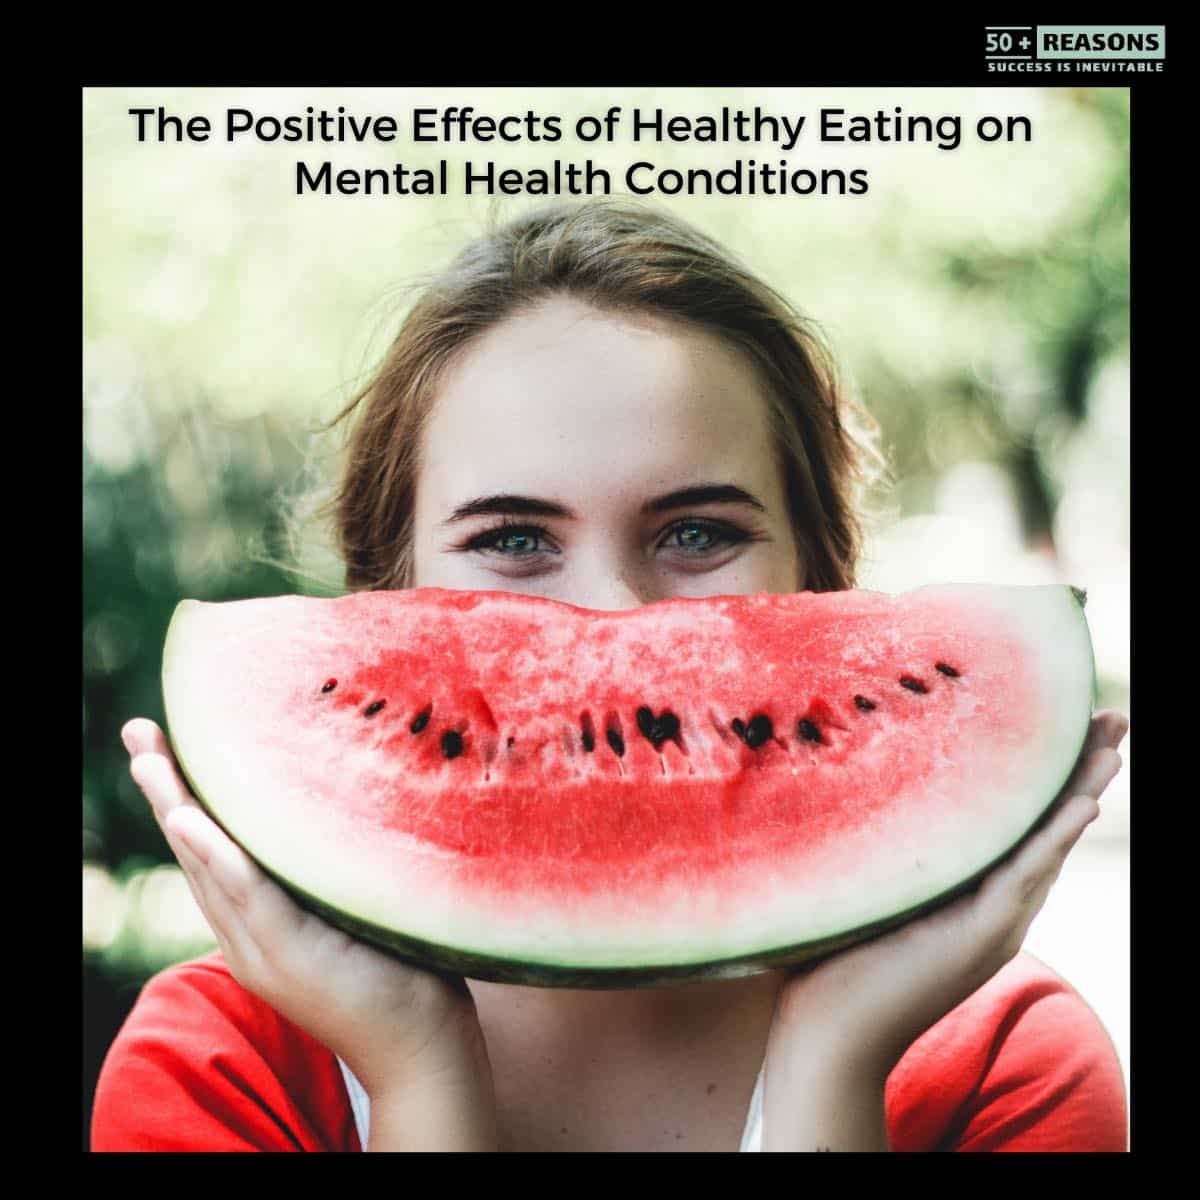 The Positive Effects of Healthy Eating on Mental Health Conditions